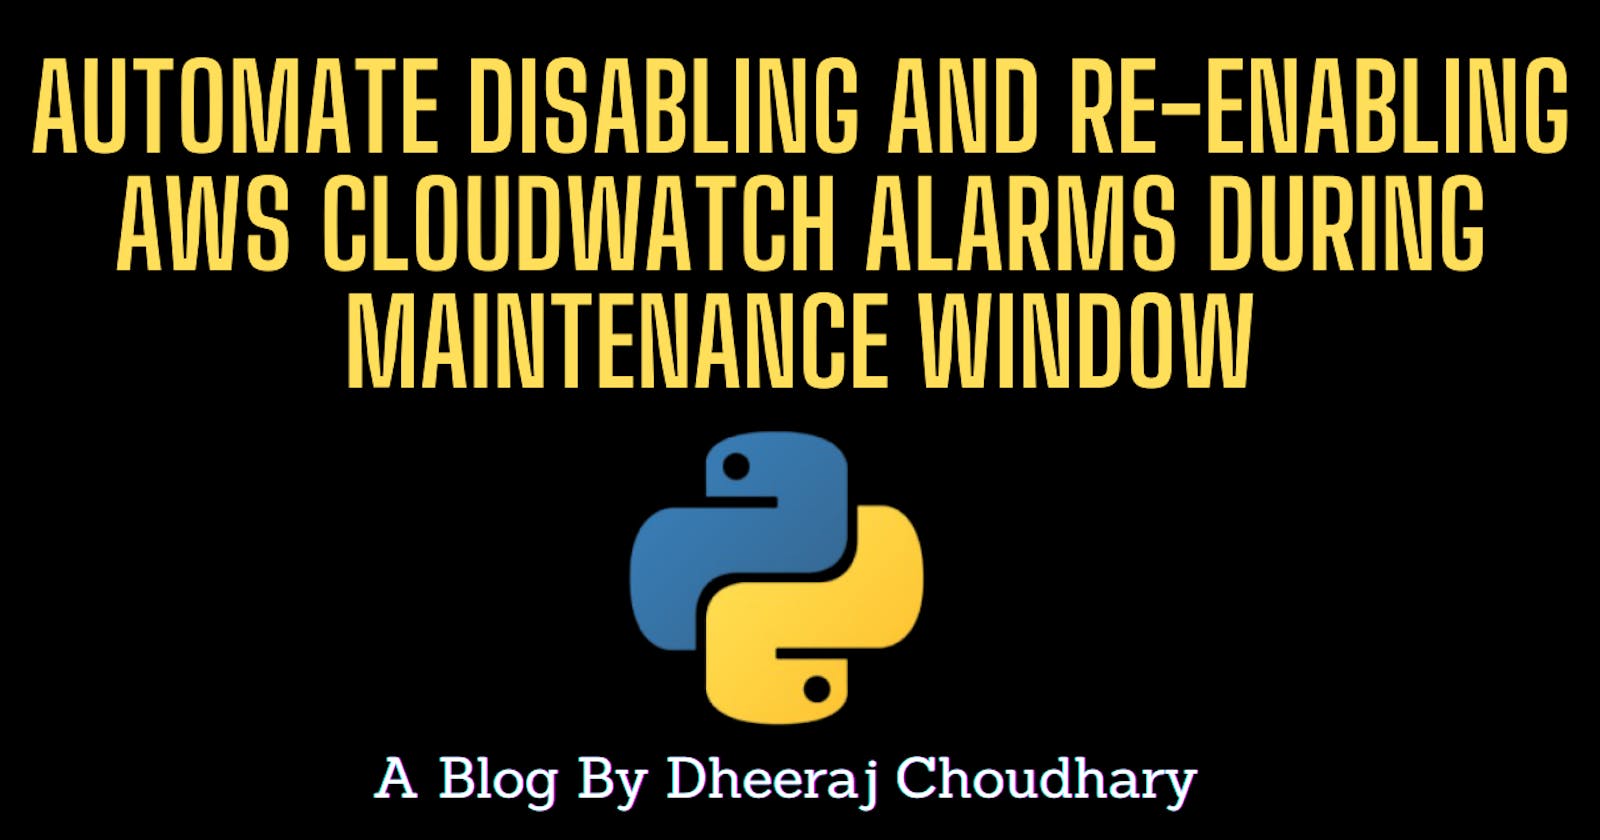 Automate Disabling And Re-enabling AWS Cloudwatch Alarms During Maintenance Window